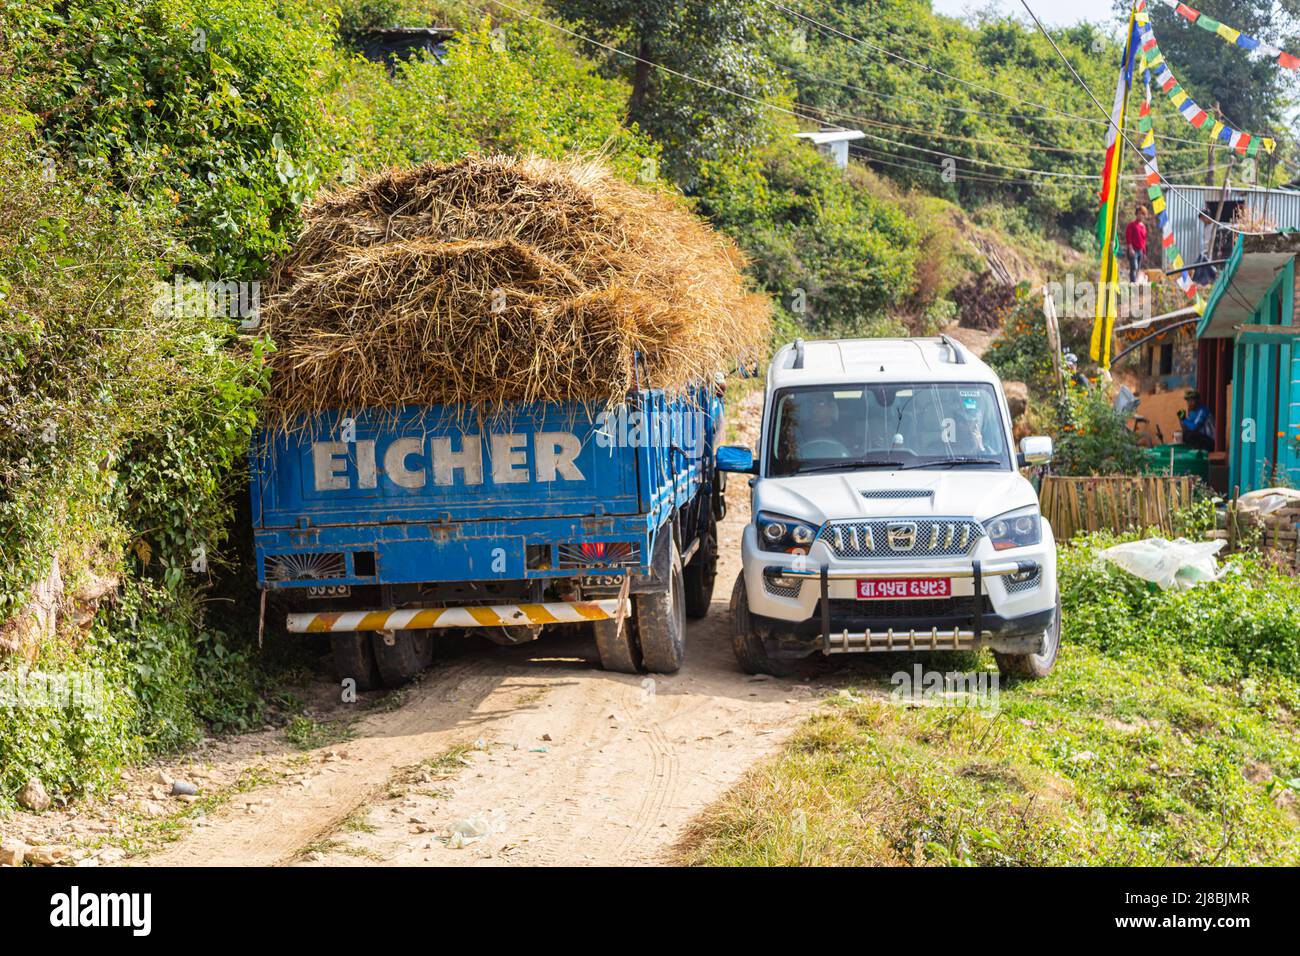 Nepal - October 29, 2021: Two vehicles meet on a narrow mountain road in the Himalaya mountains of Nepal. The cars meander past each other to avoid cr Stock Photo